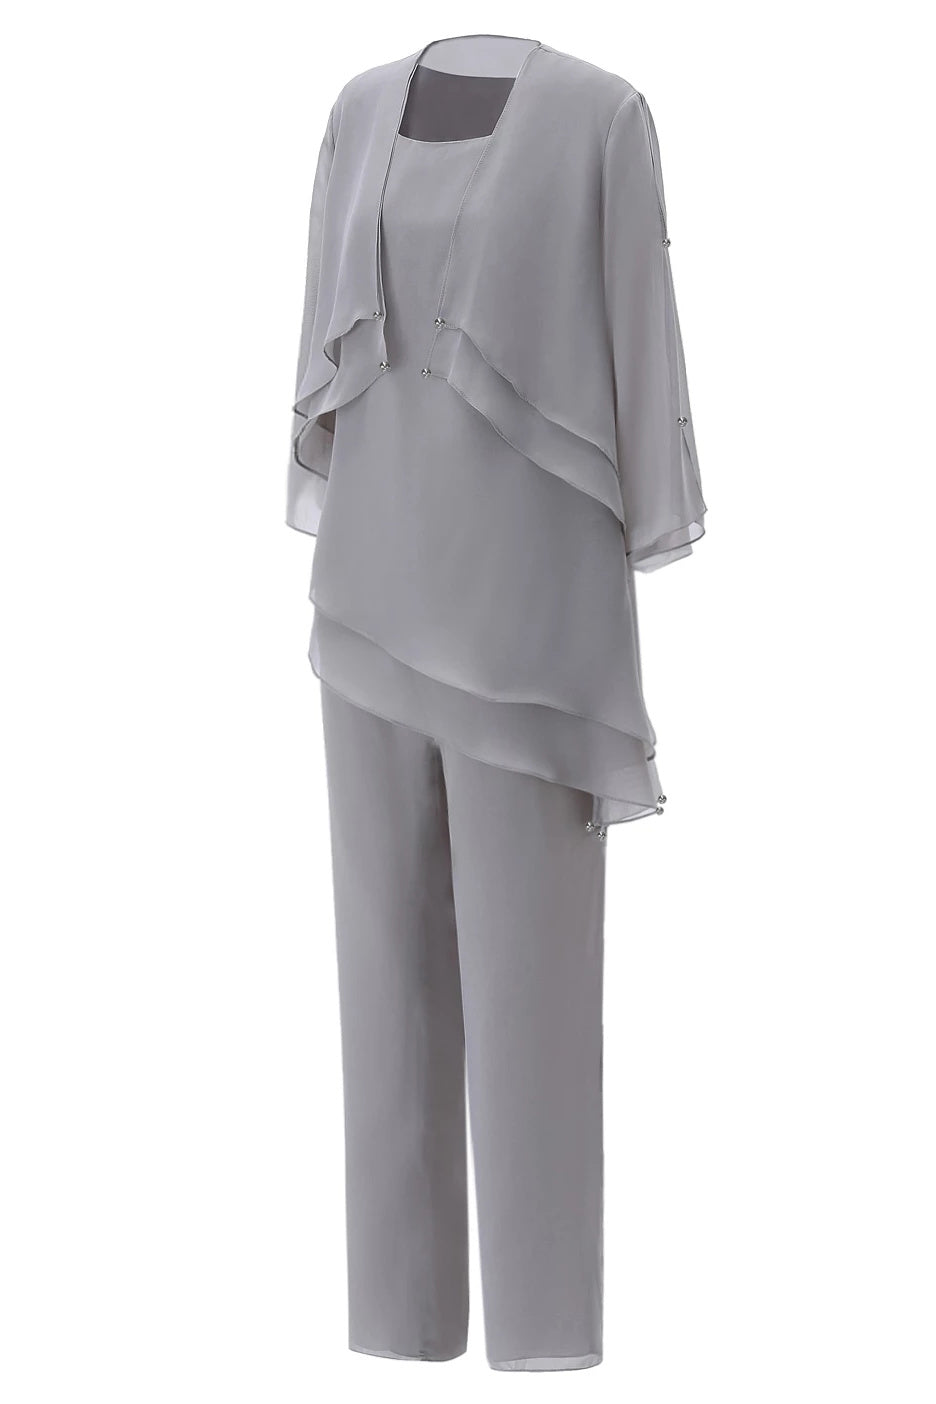 Grey Ruffles Round Neck Mother of the Bride Pant Suits – Dreamdressy